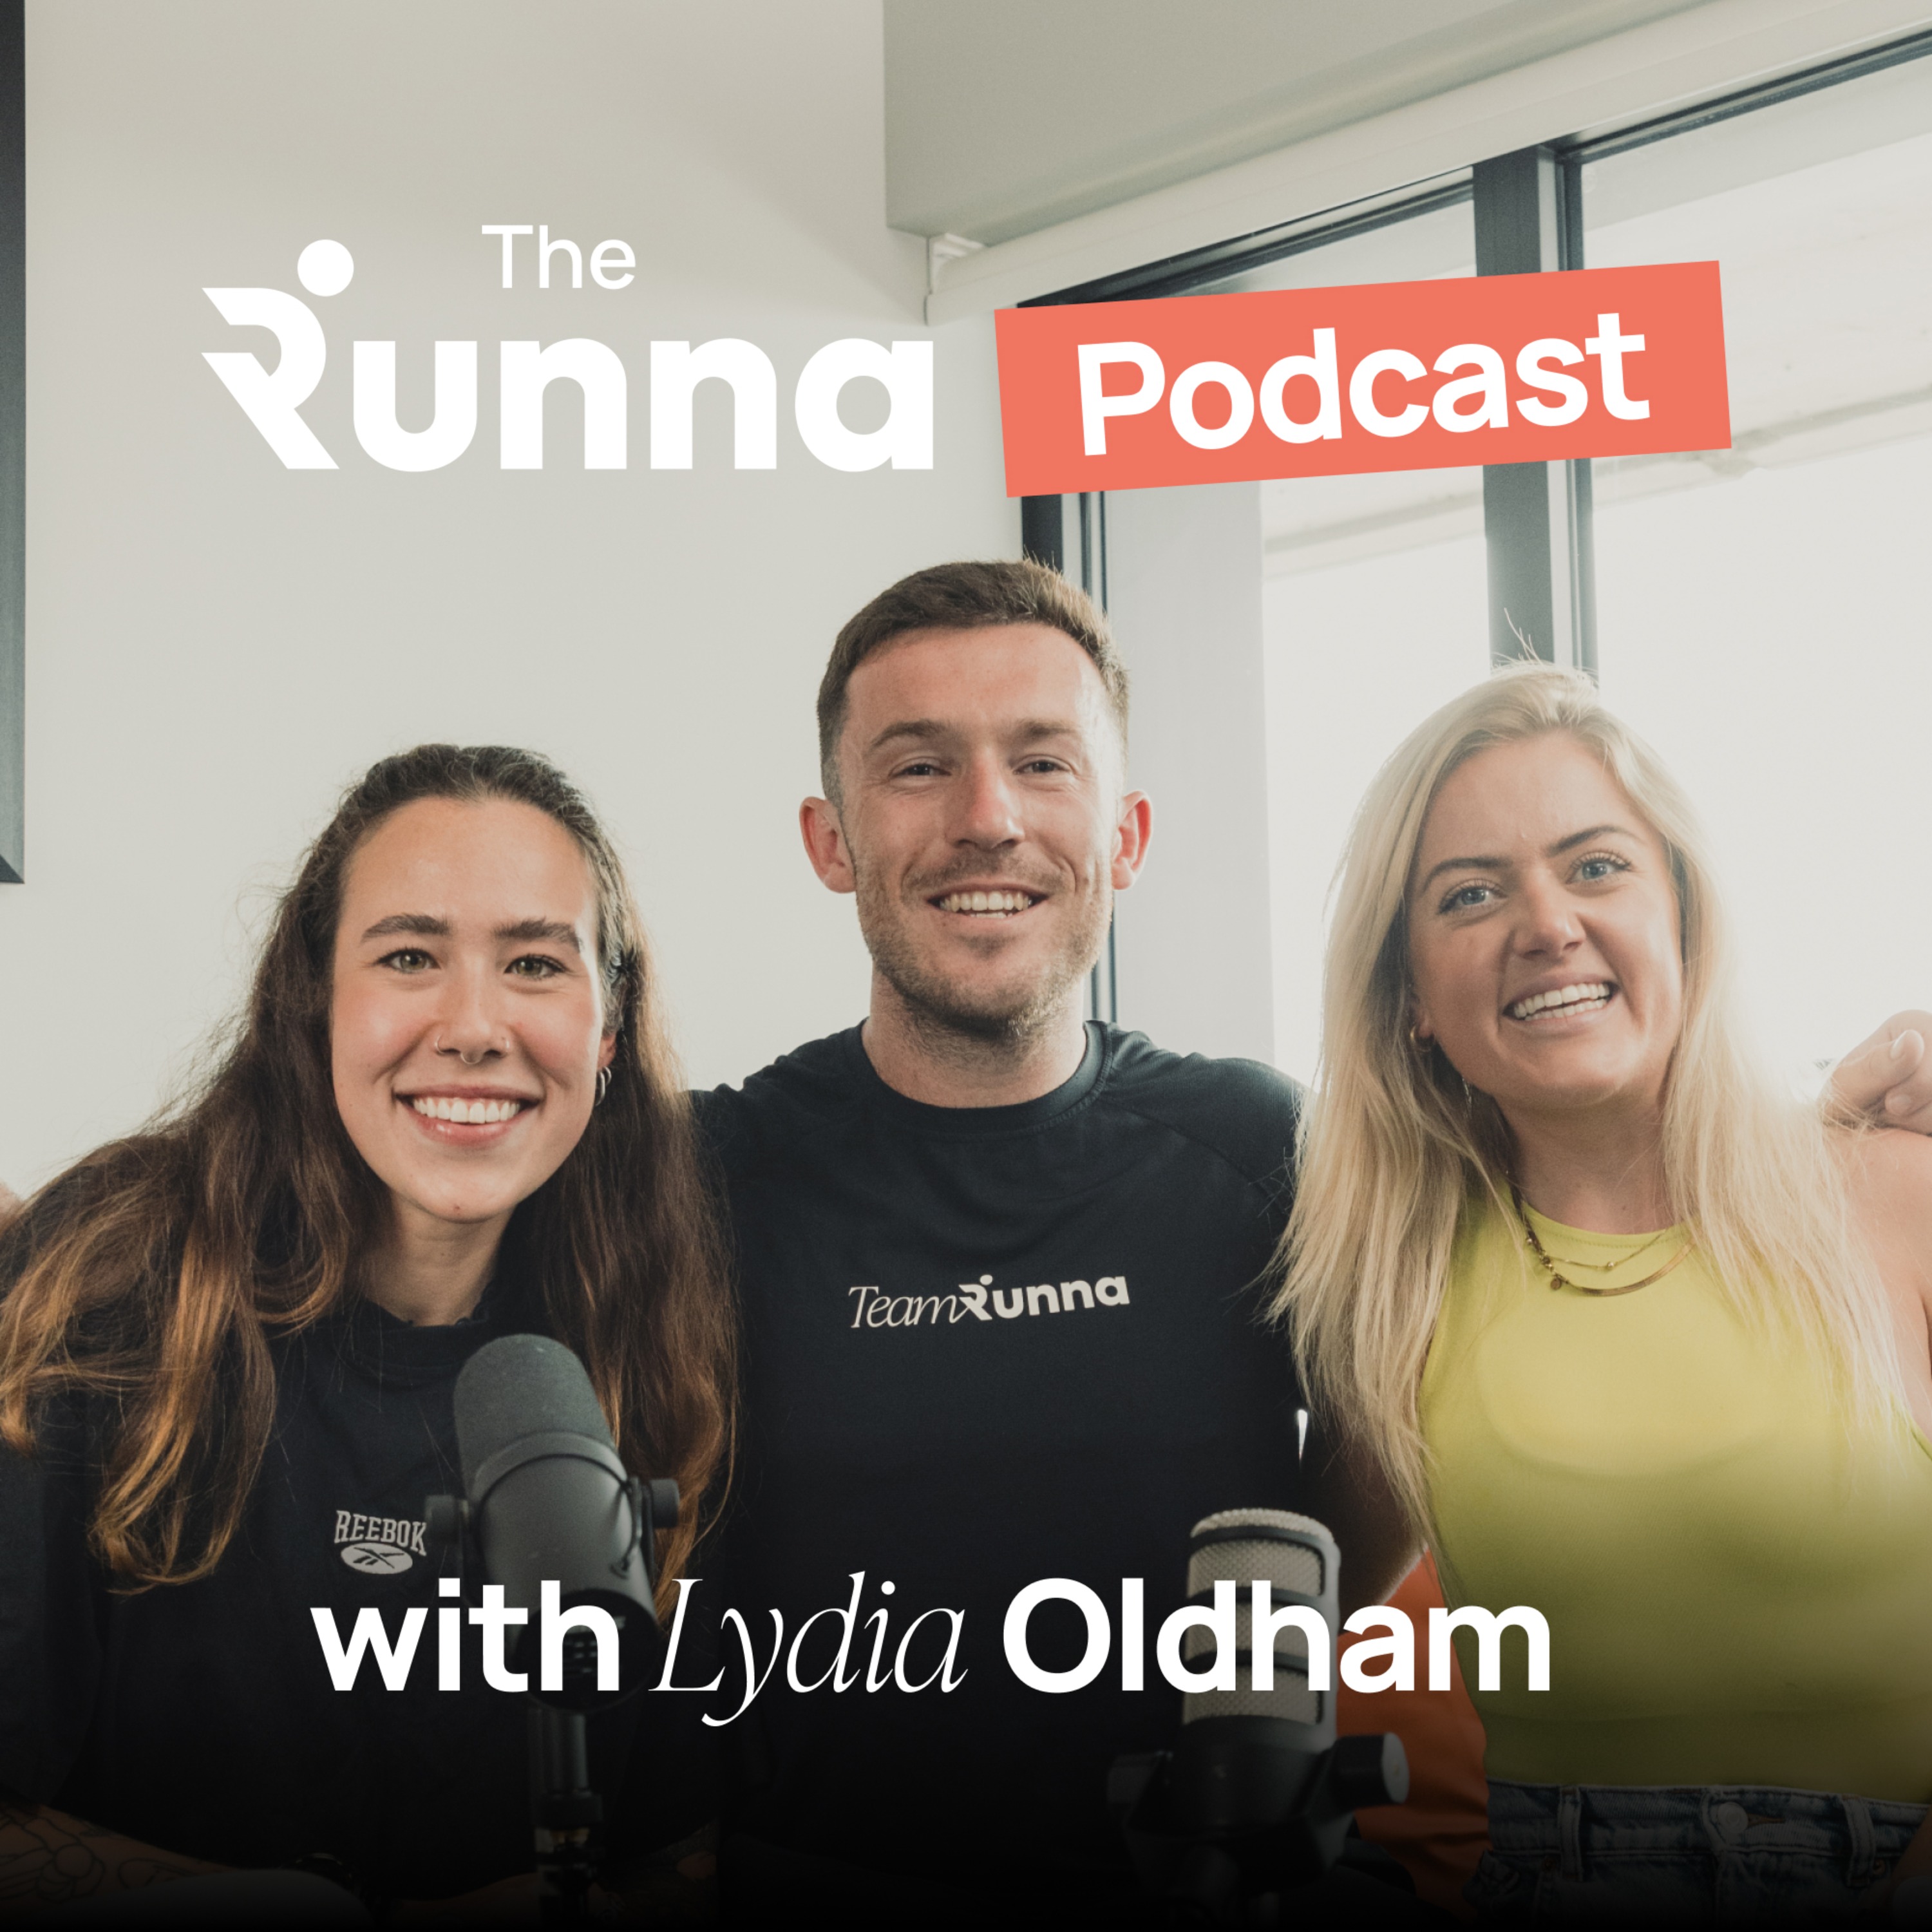 Lydia Oldham: Episode 13 - From Hallucinations to a Vegas Wedding: The 500km Race of a Lifetime